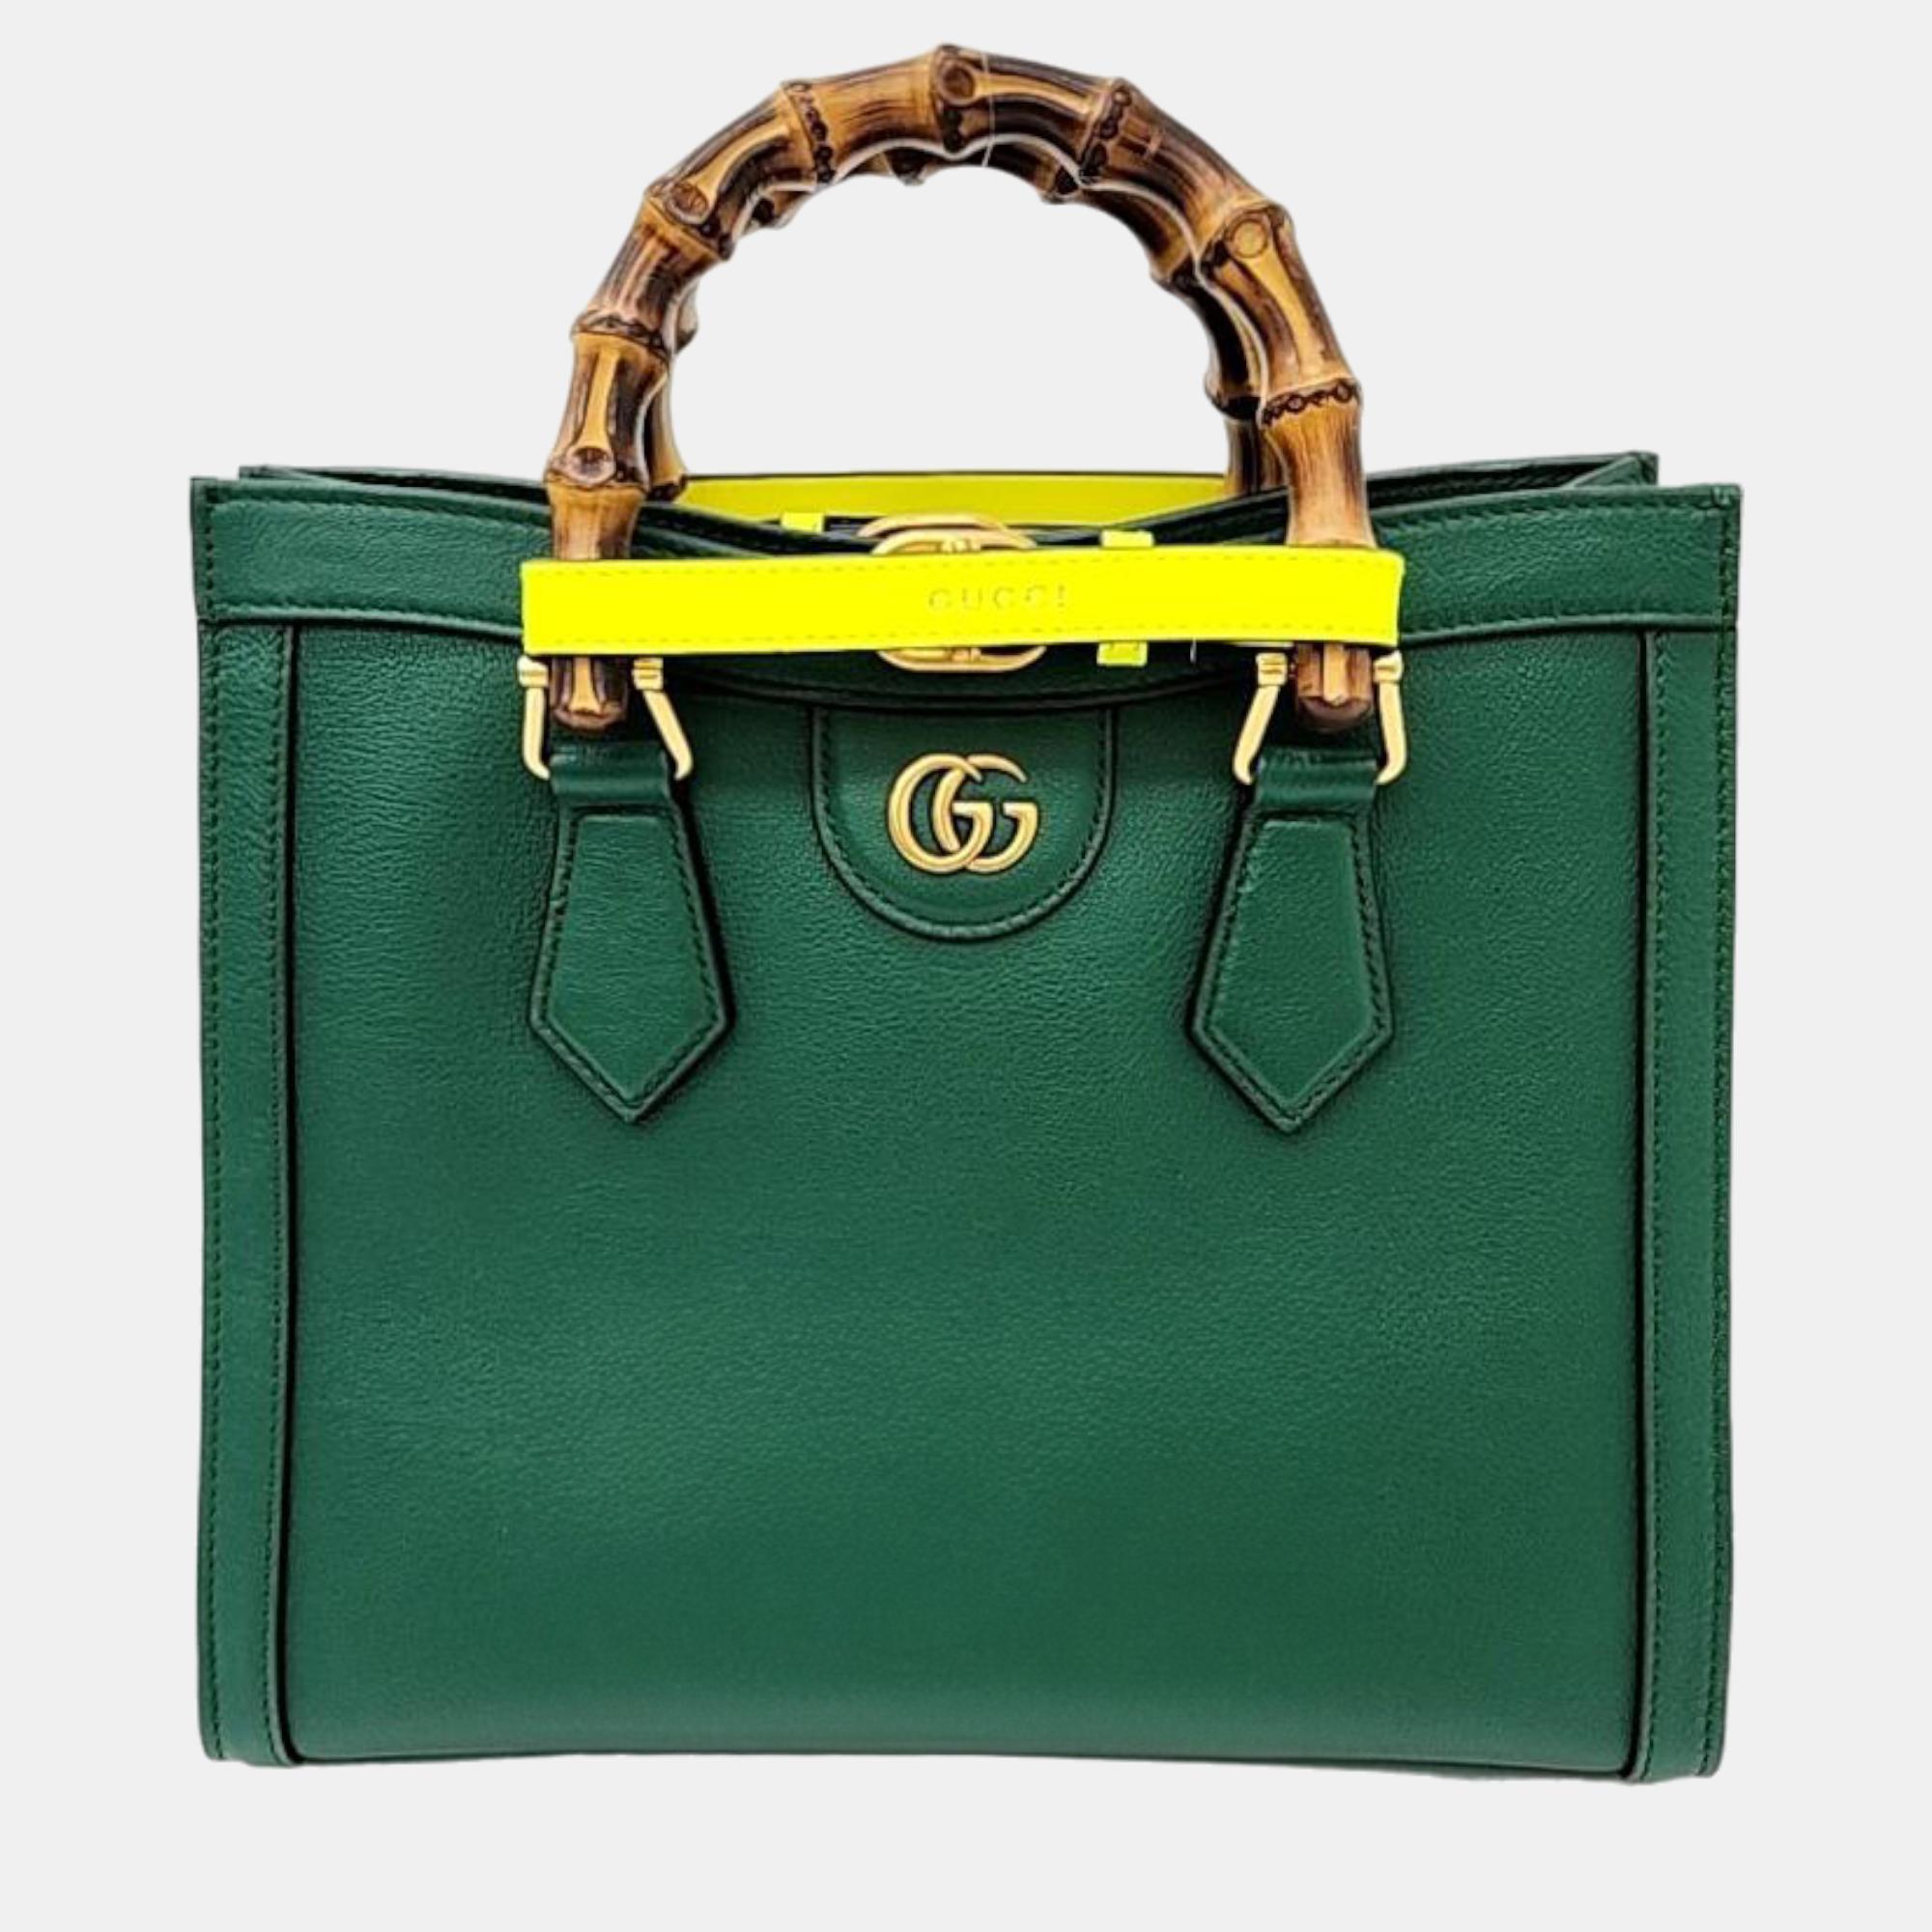 Gucci green leather small diana tote bag